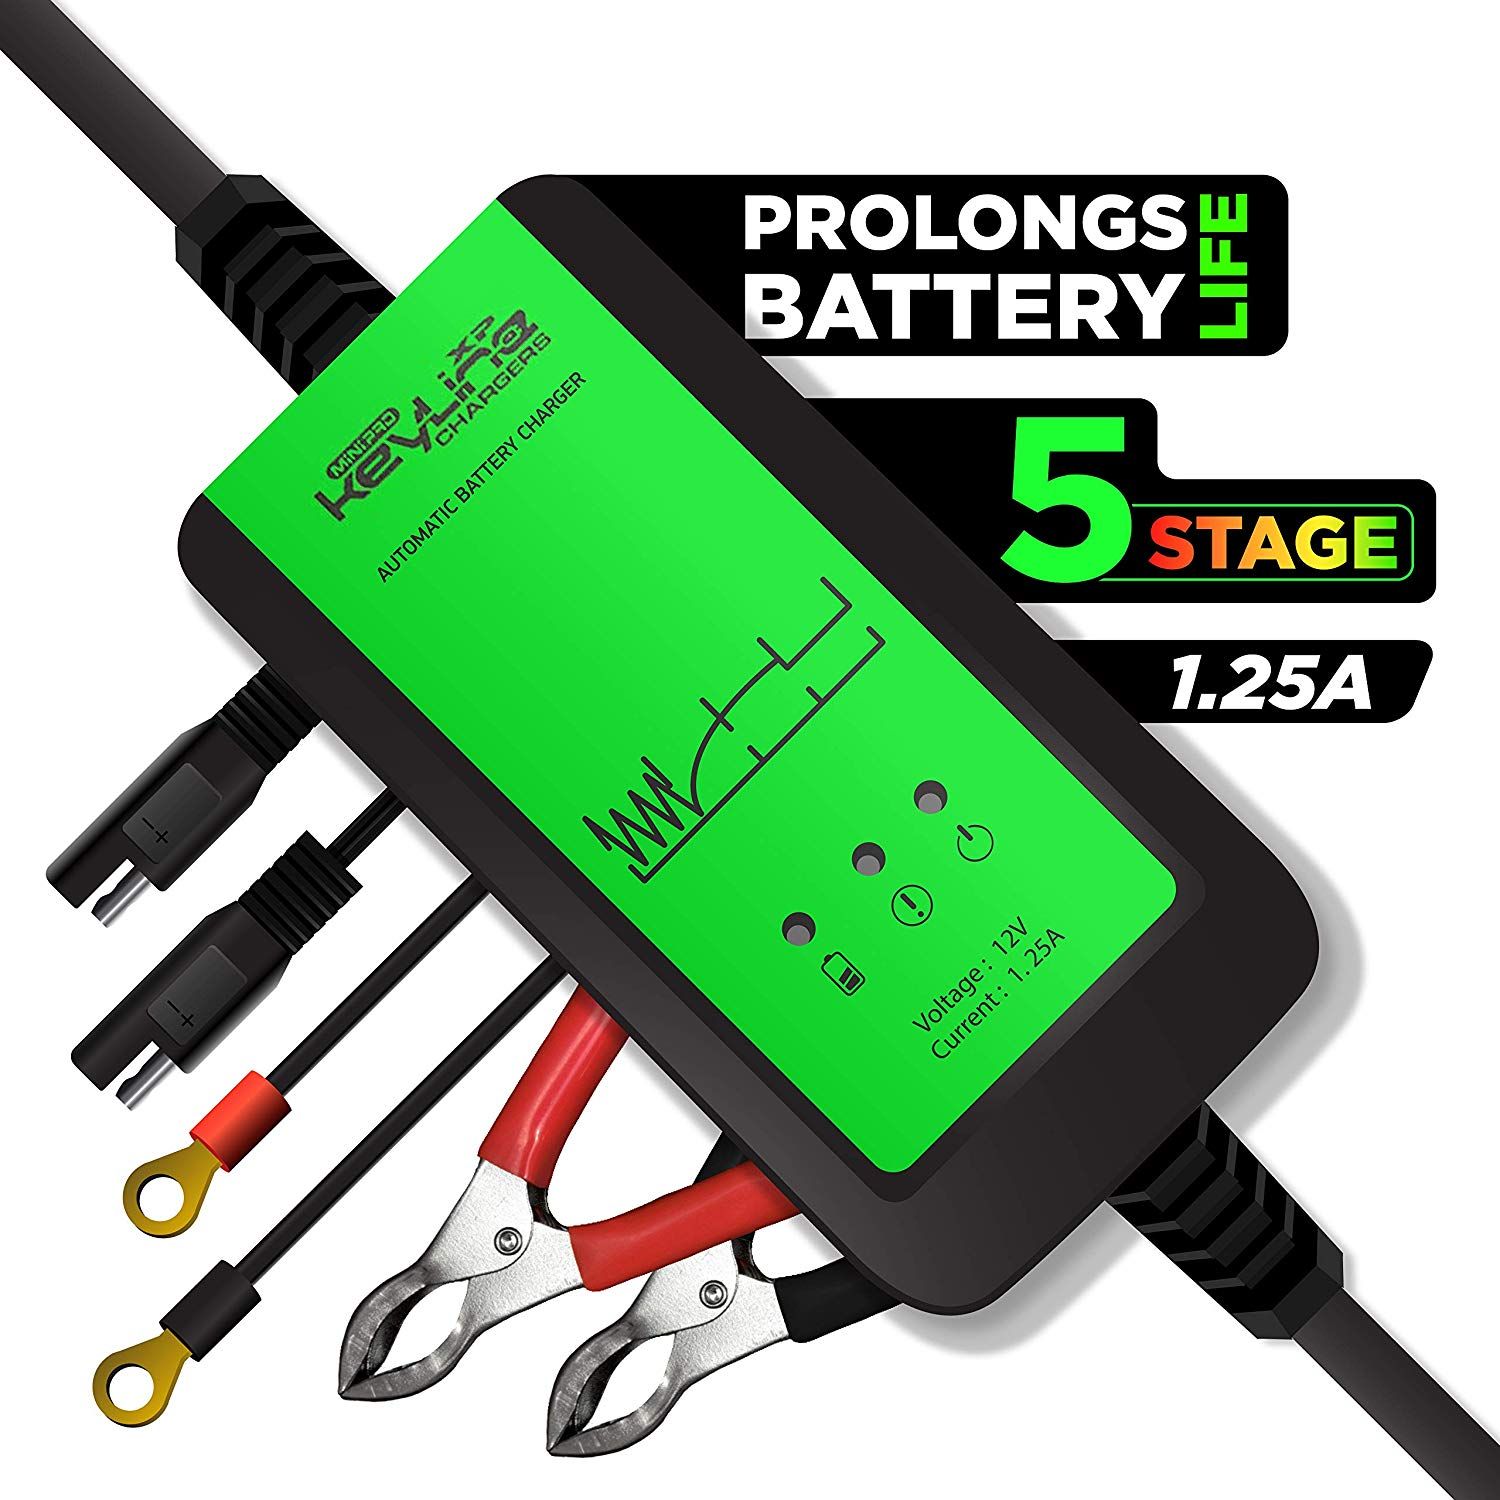 Sub Battery Charger Smart isolator. Trickle Charger.